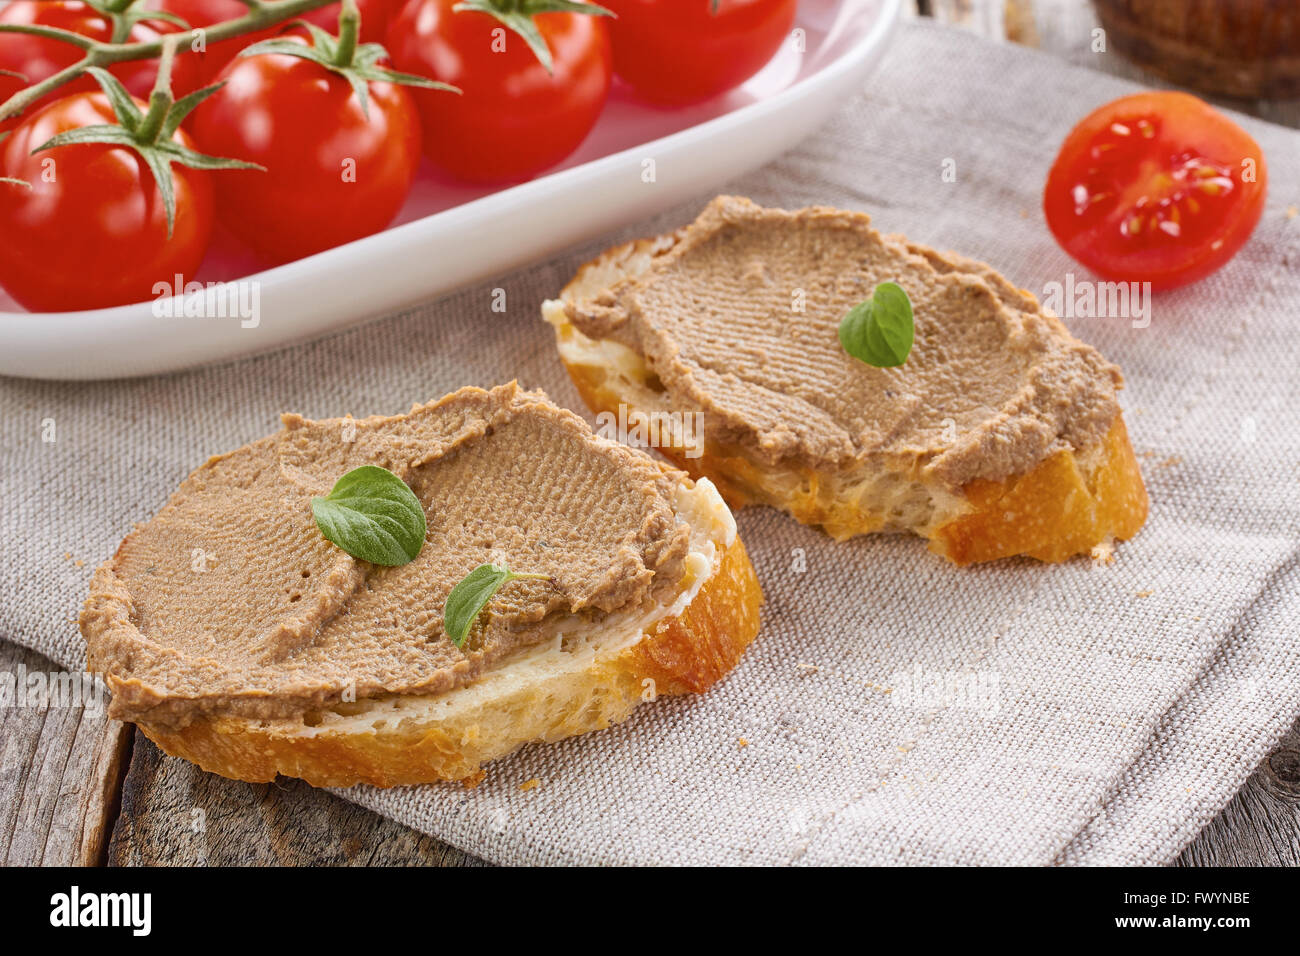 Bread with chicken liver pate and tomatoes Stock Photo